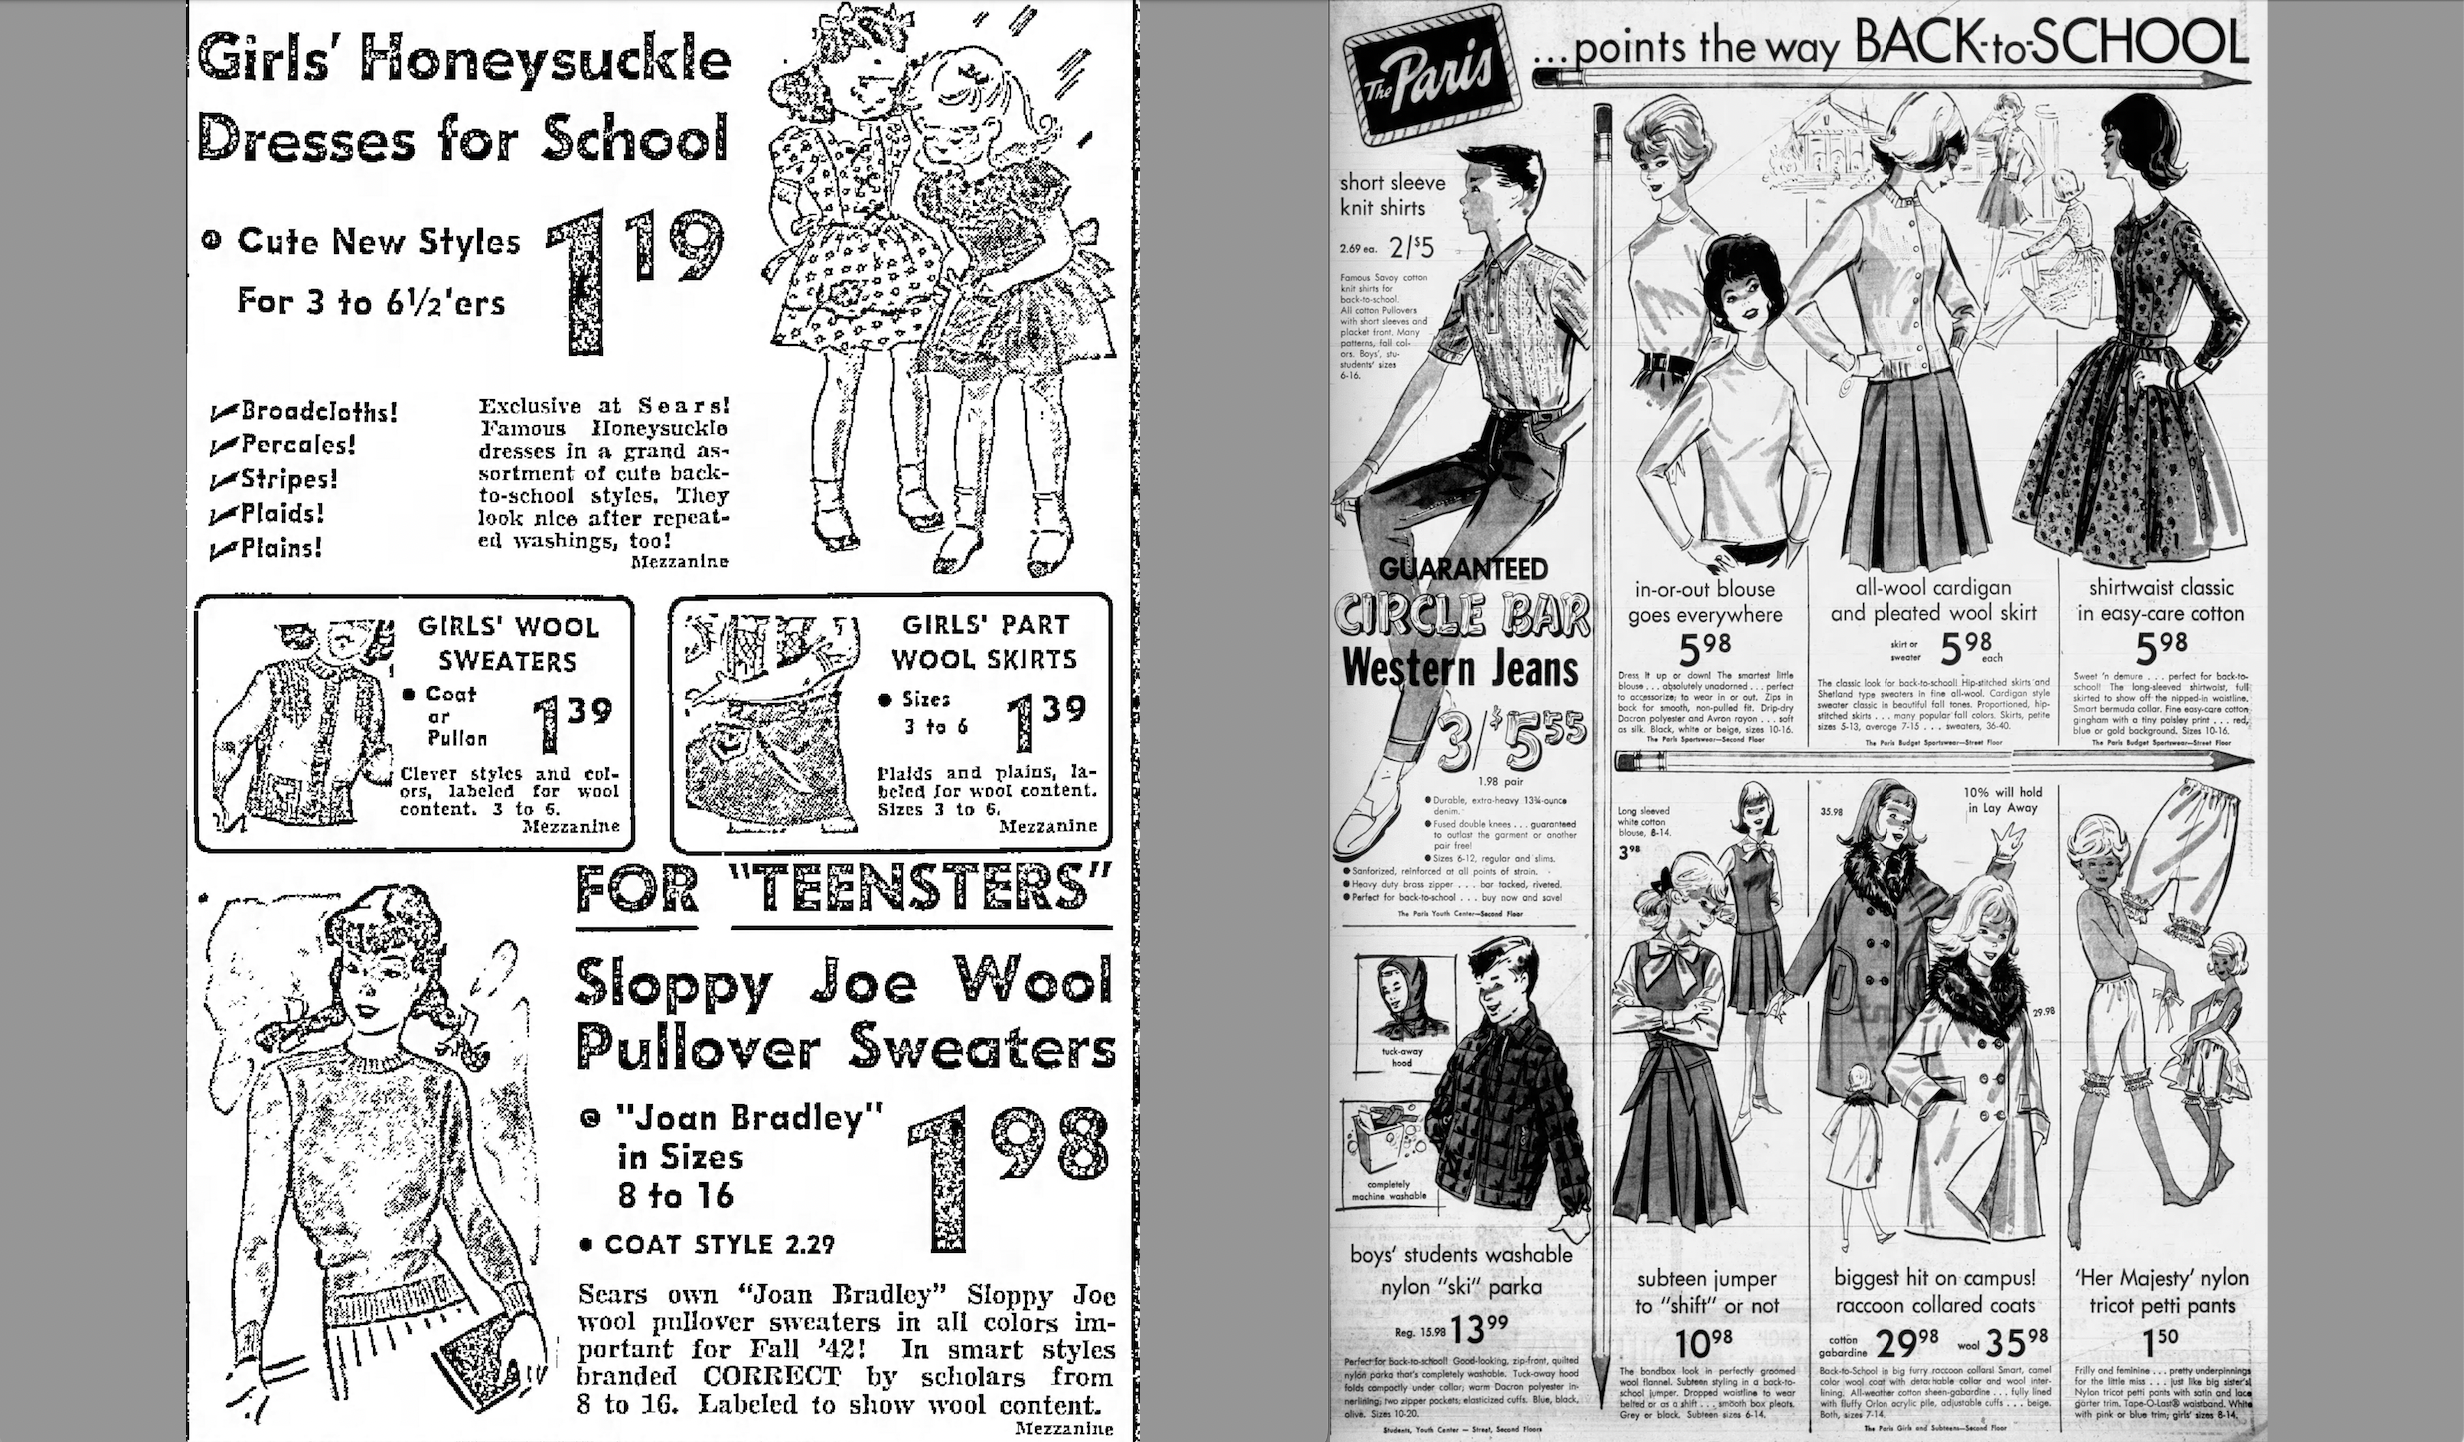 Newspaper ads feature back-to-school clothes for children and teens in 1942 and 1962